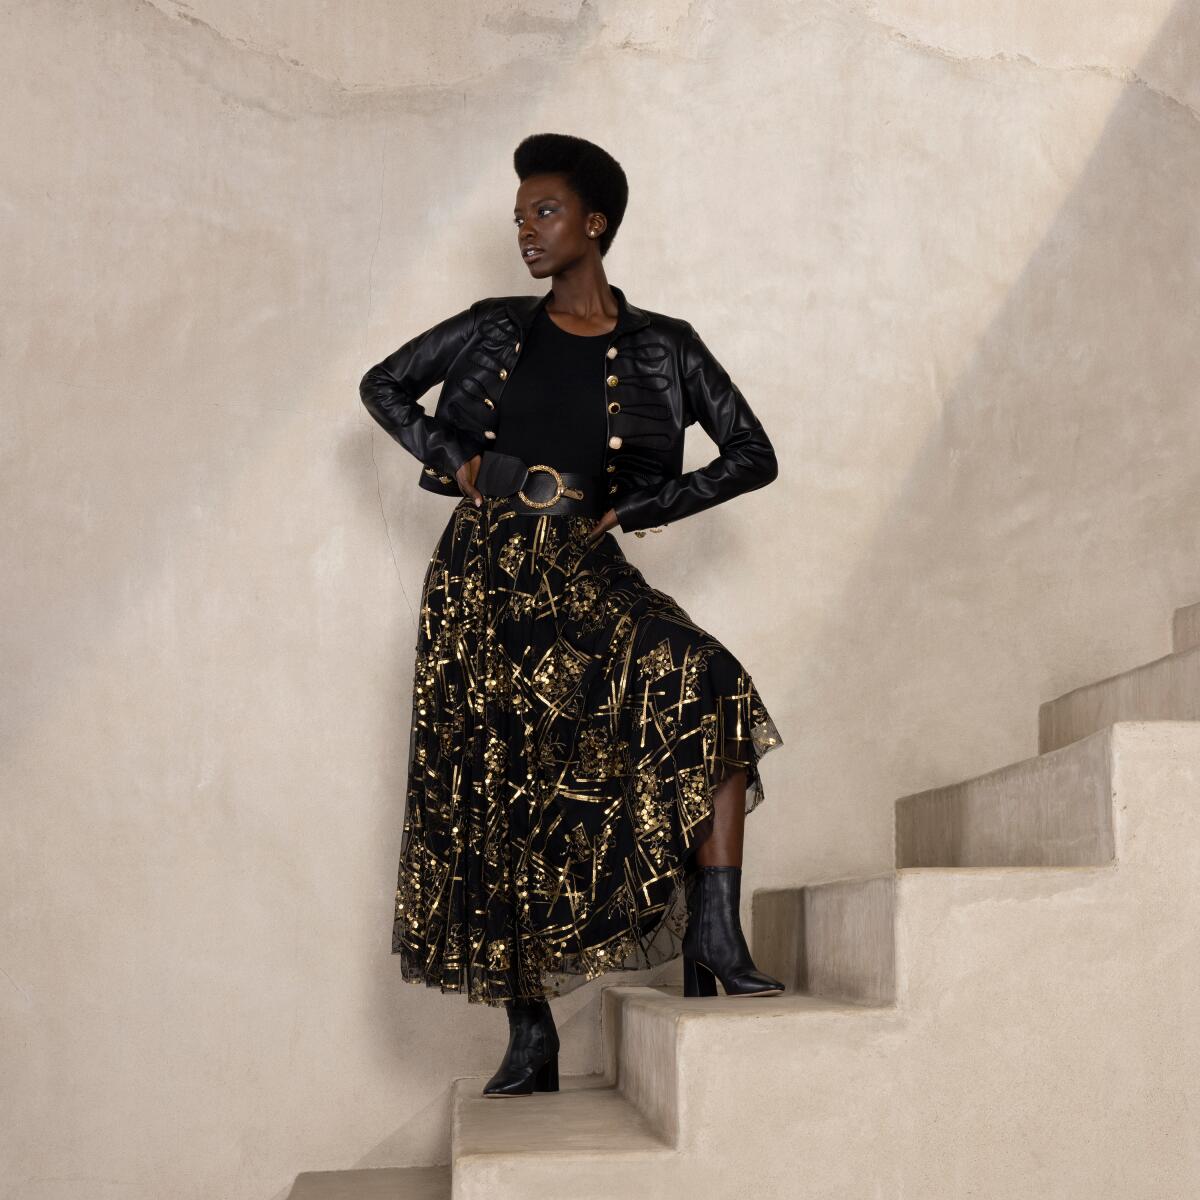 A model posing on a staircase in a sparkly gold and black skirt and short jacket